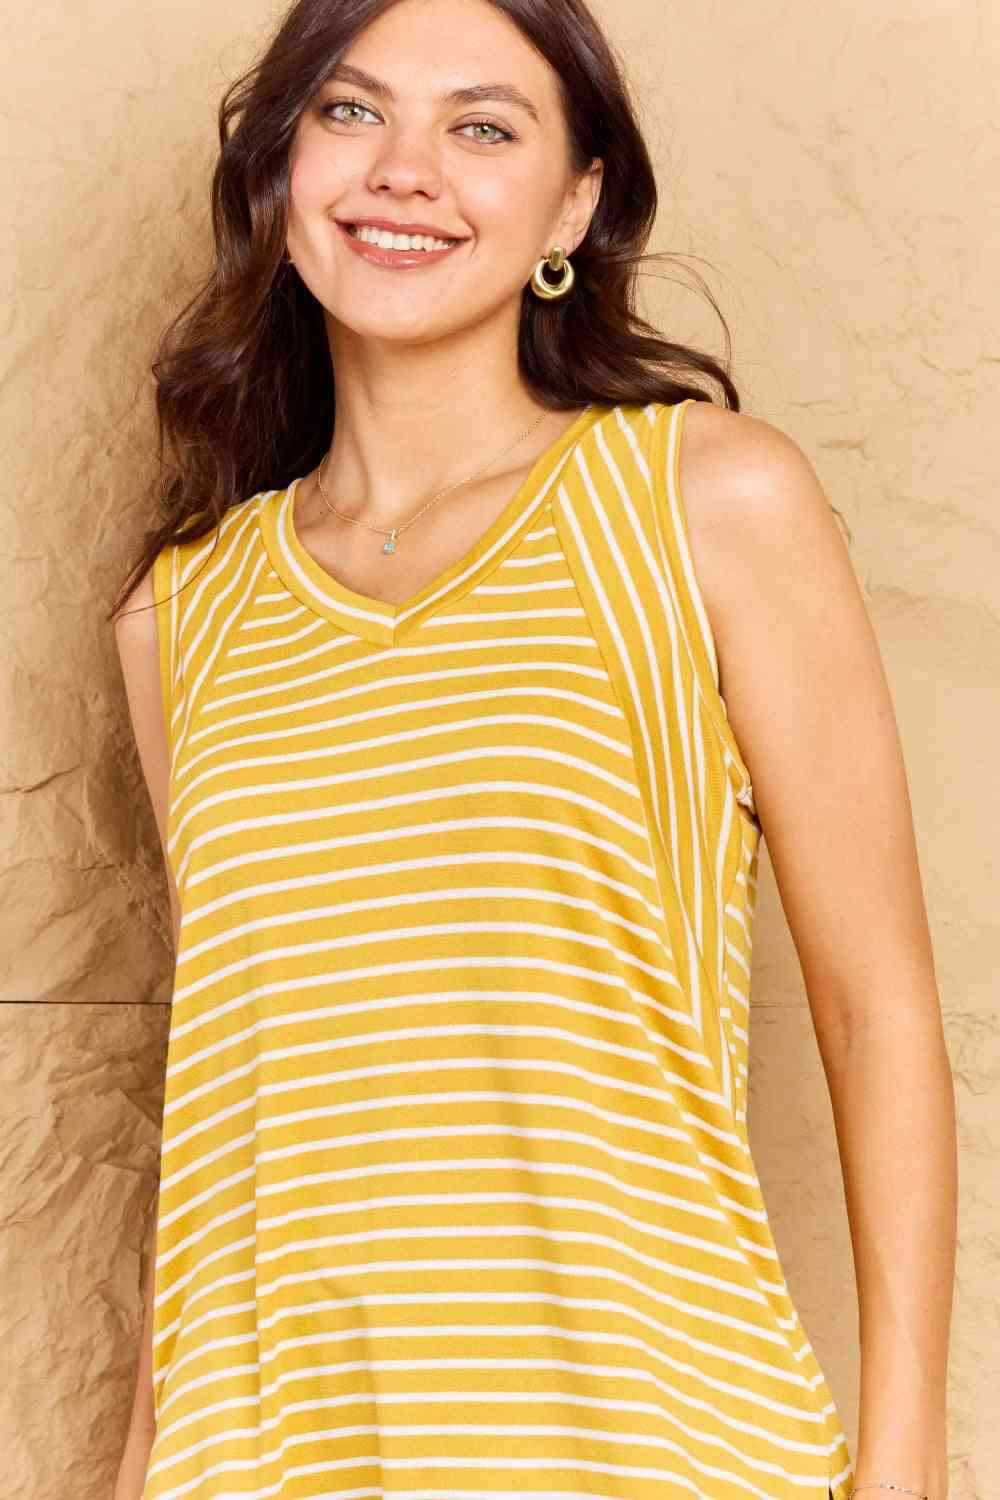 Talk To Me Full Size Striped Sleeveless V-Neck Top - Women’s Clothing & Accessories - Shirts & Tops - 6 - 2024